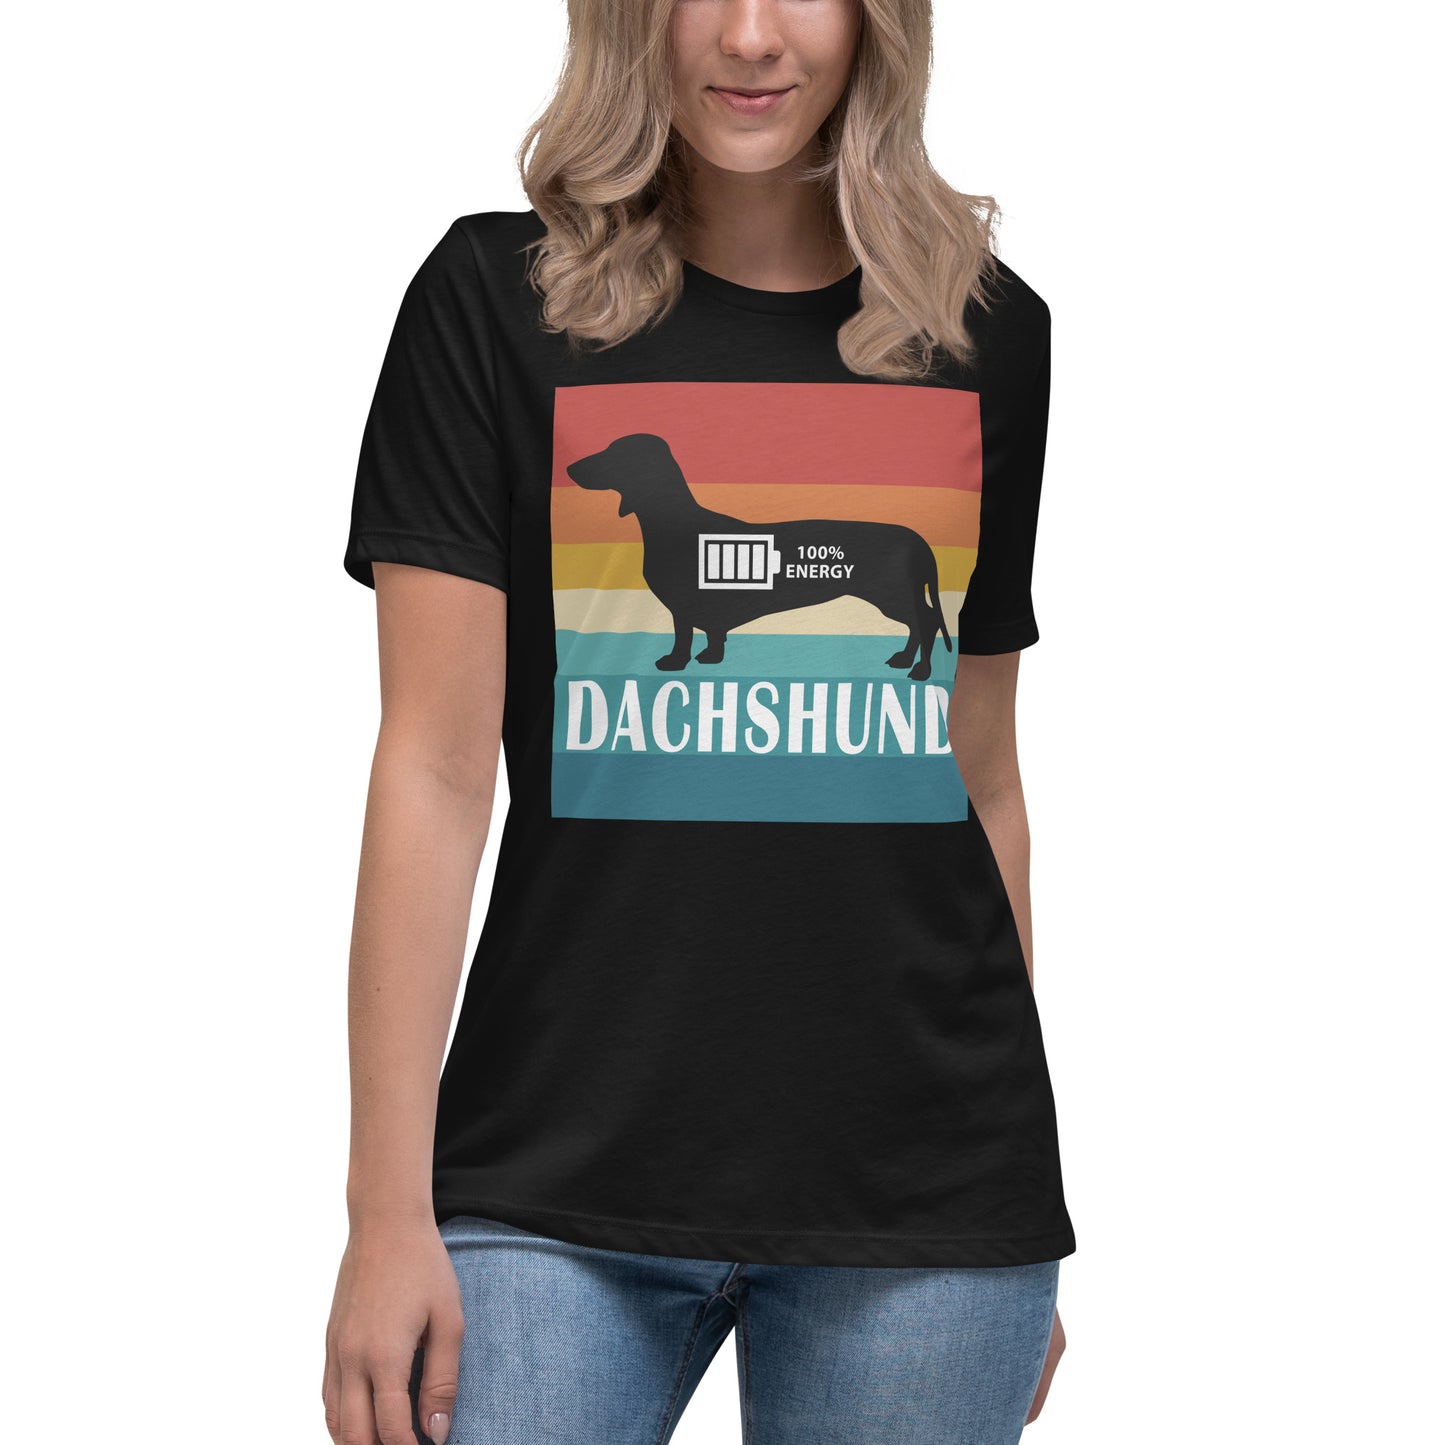 Dachshund 100% Energy Women's Relaxed T-Shirt by Dog Artistry